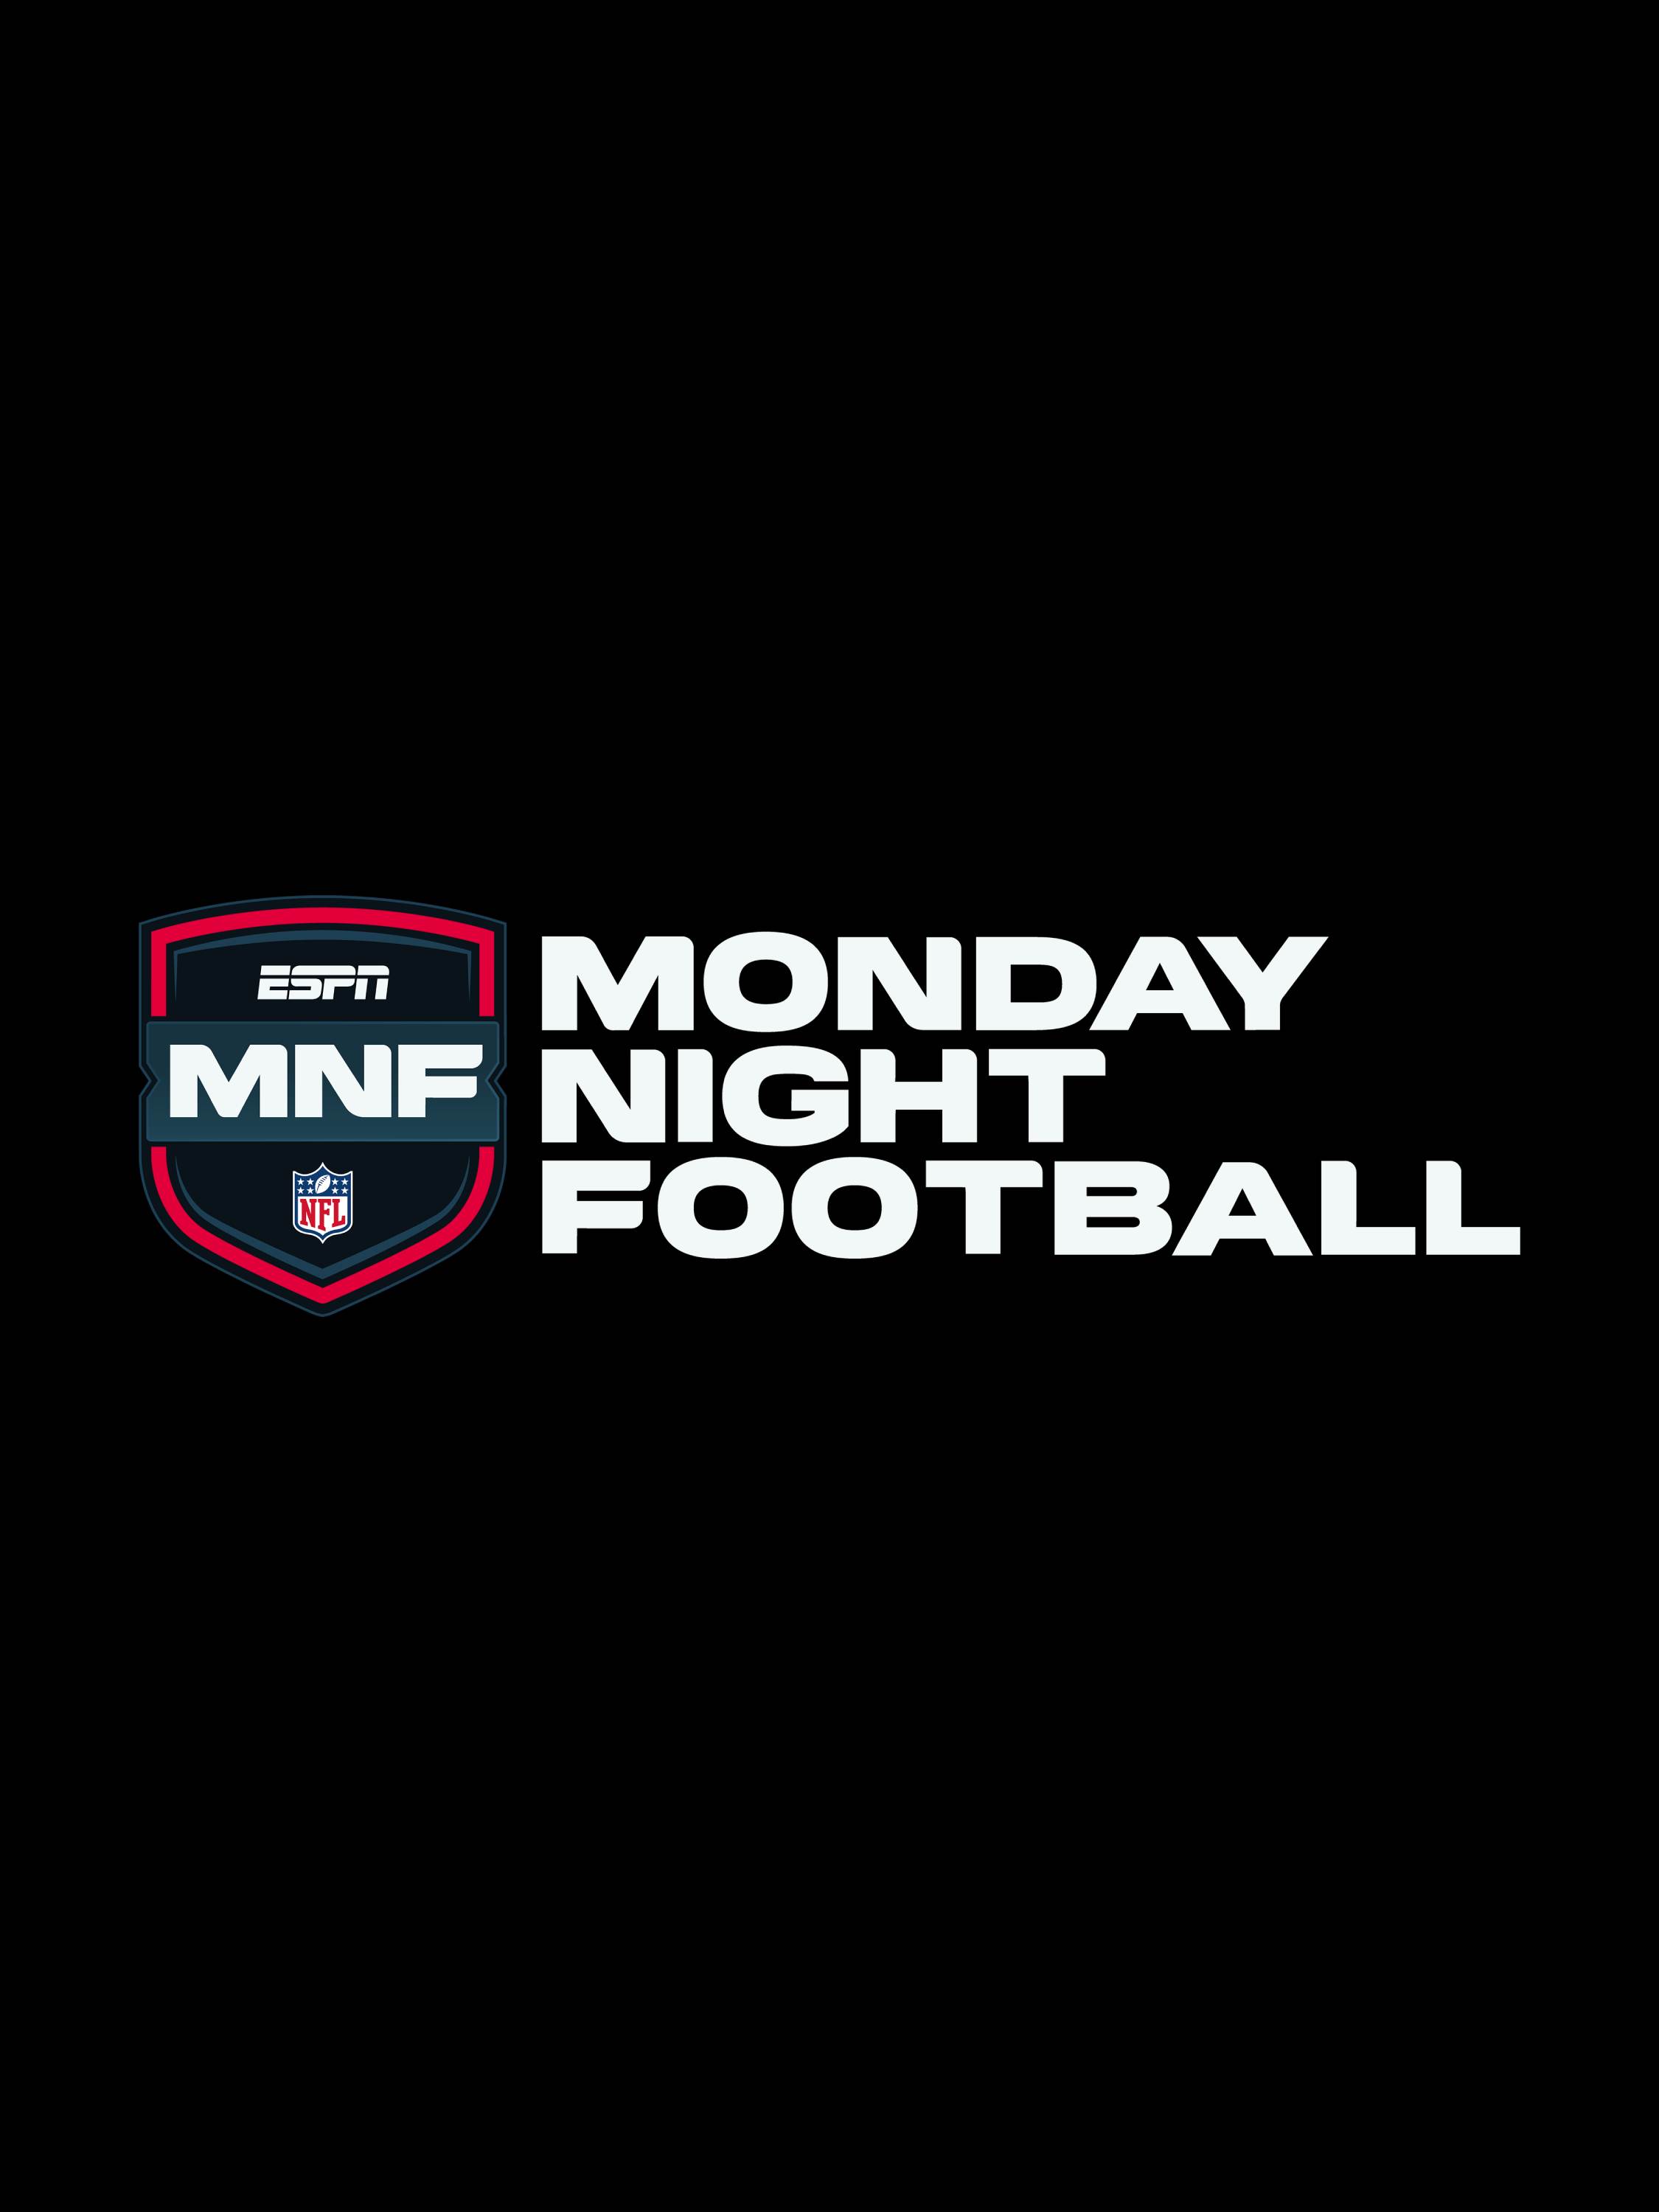 who plays on mnf tonight